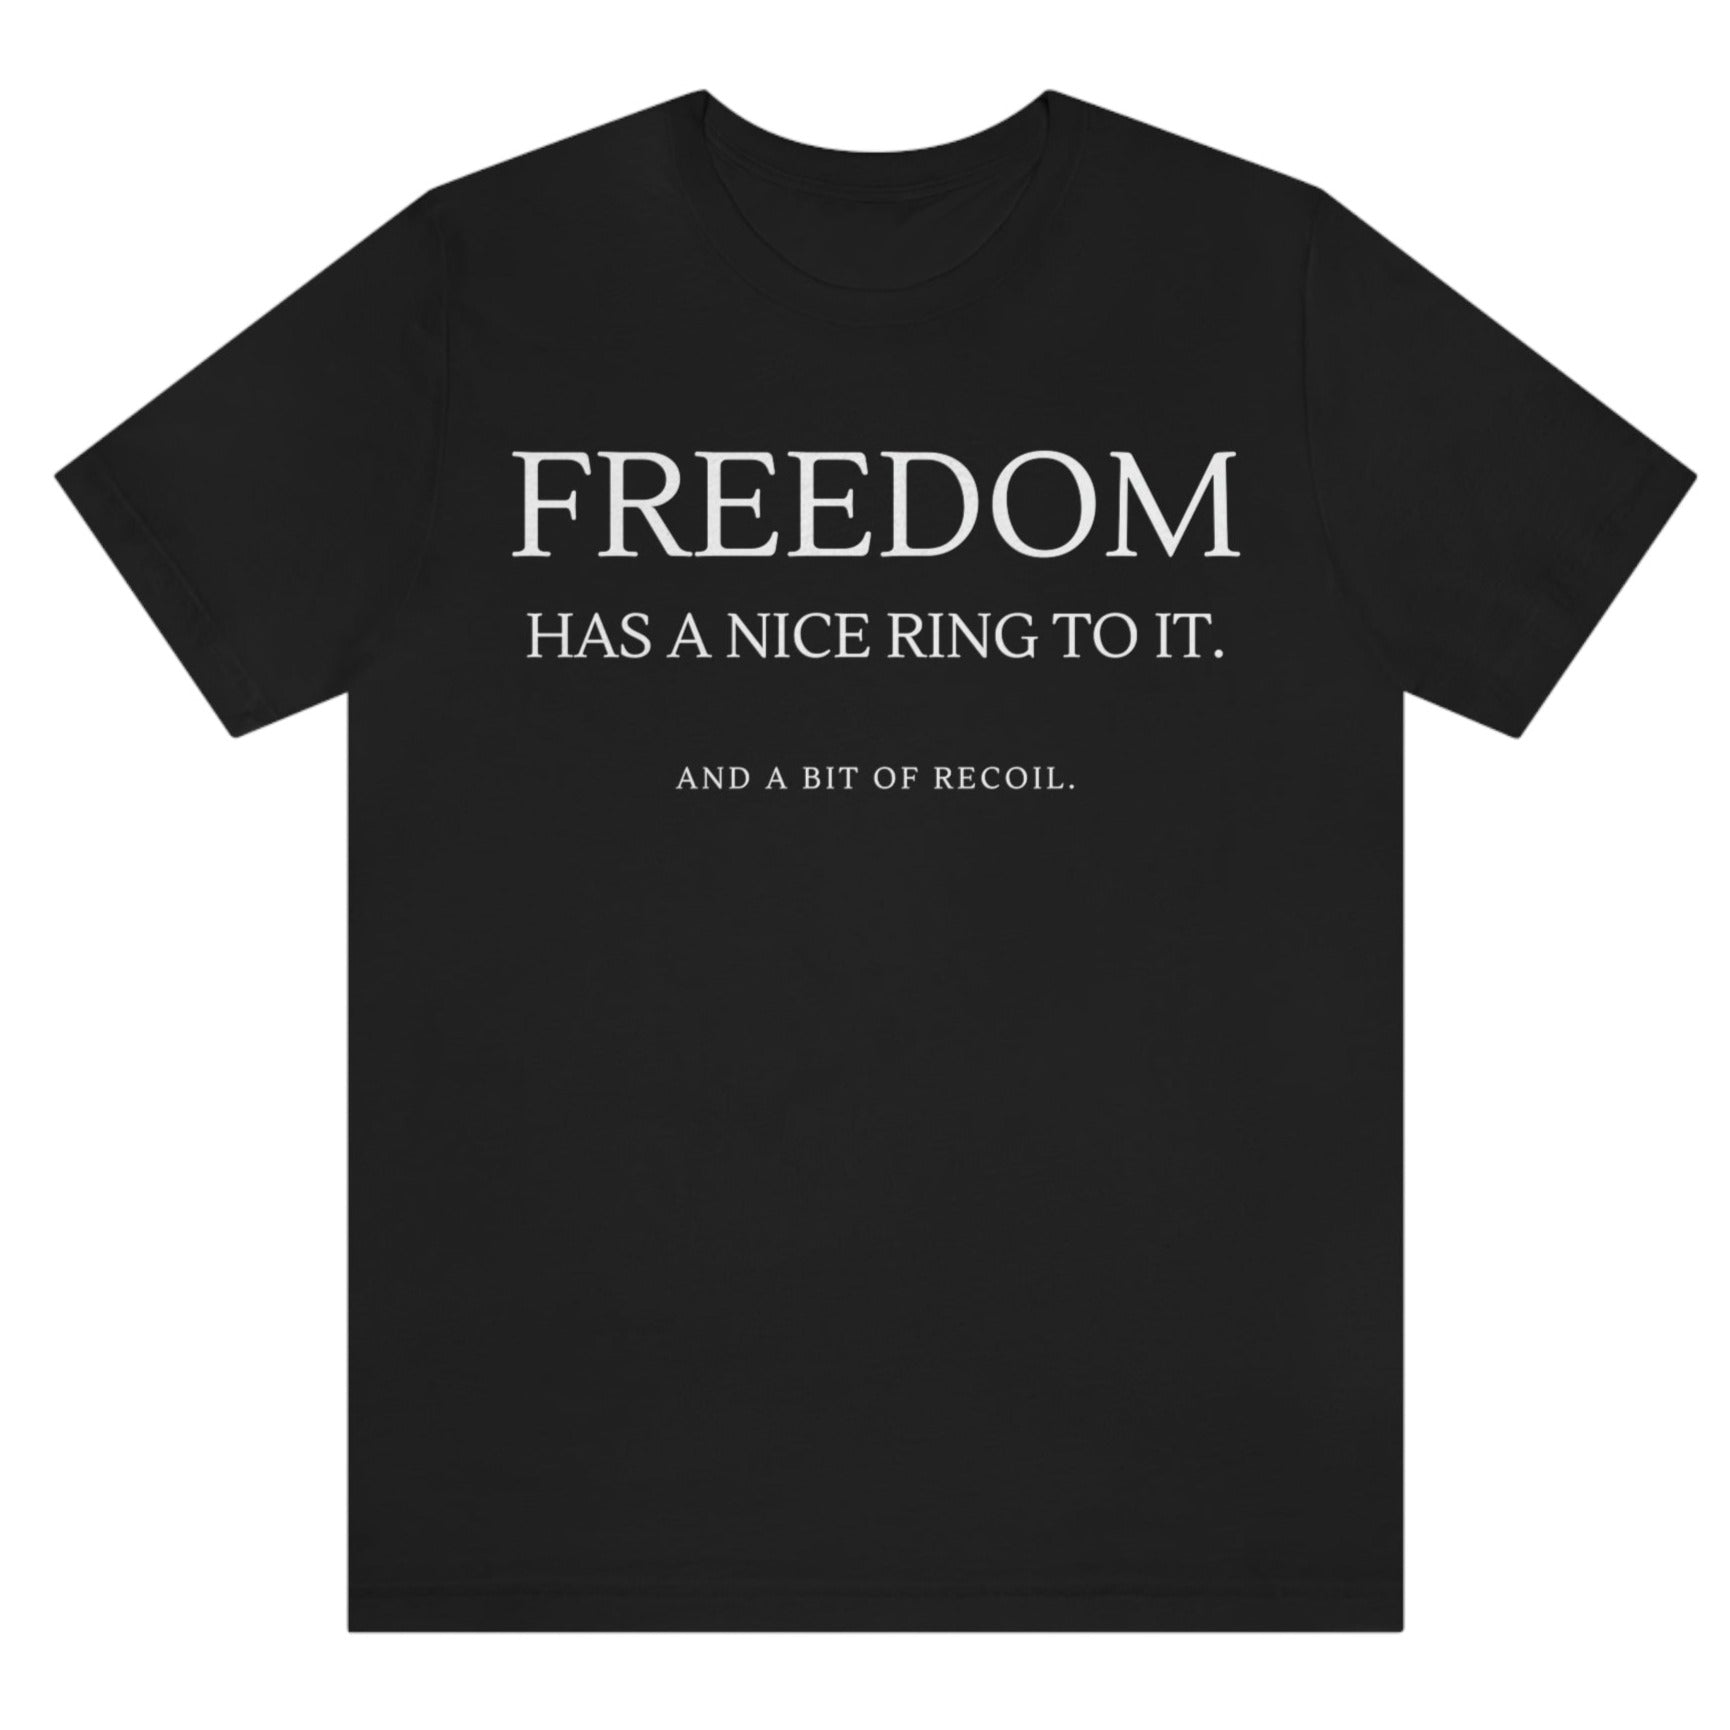 freedom-has-a-nice-ring-to-it-and-a-bit-of-recoil-black-t-shirt-2a